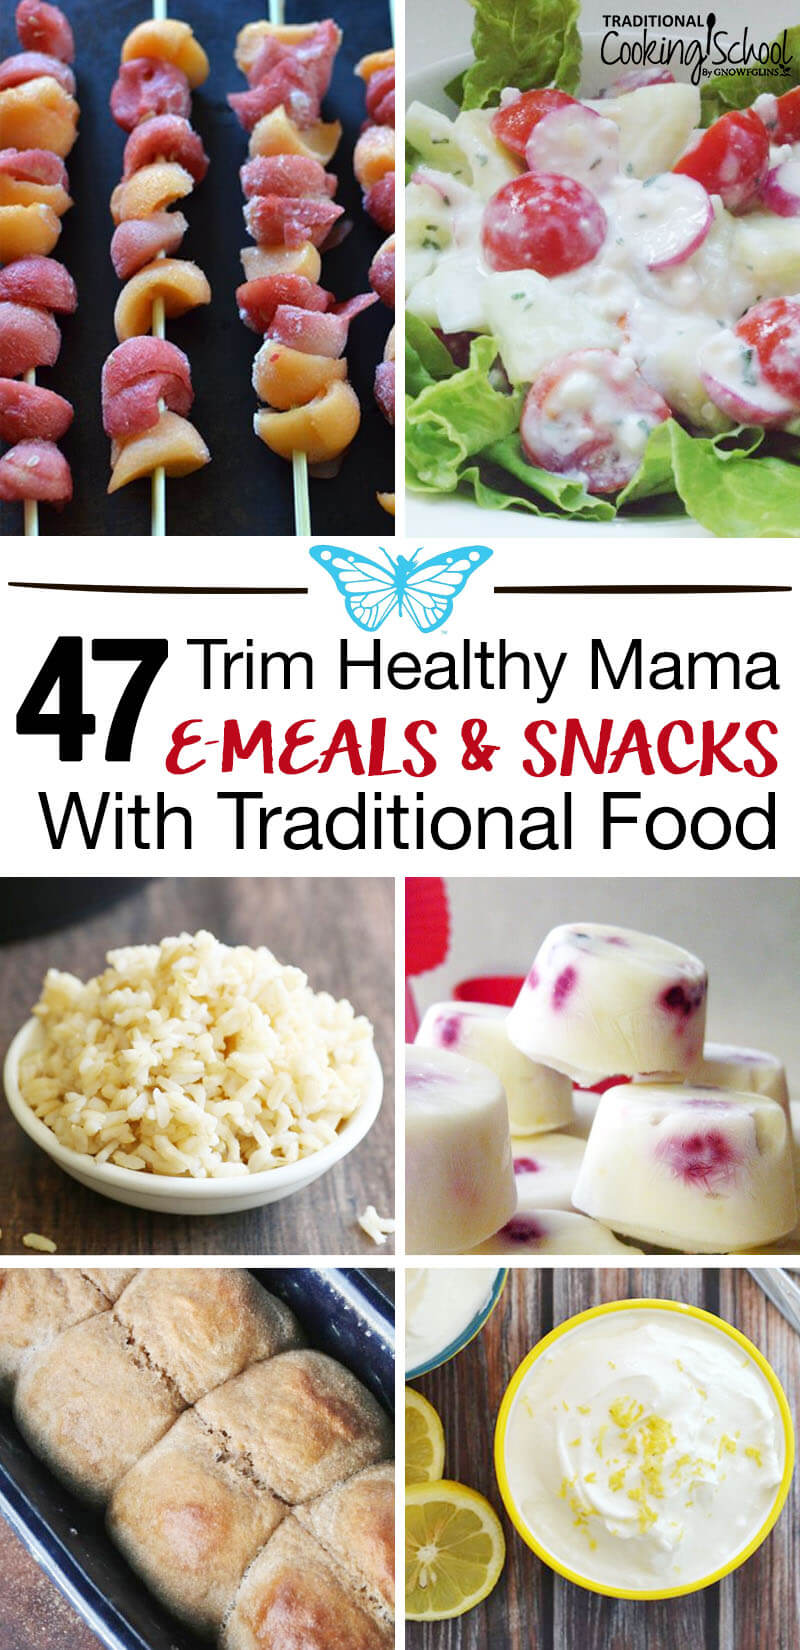 47 Trim Healthy Mama E Recipes, Meals and Snacks - Traditional foods and Trim Healthy Mama...can the two go hand-in-hand? Yes! Because E meals, dinners and snacks with traditional foods are the hardest to find, here's a boat load of ideas -- so you don't have to resort to constant fuel pull, low-fat or store-bought foods to fill in the gaps. #trimhealthymama #erecipes #esnacks #dinner #meals #lowcarb